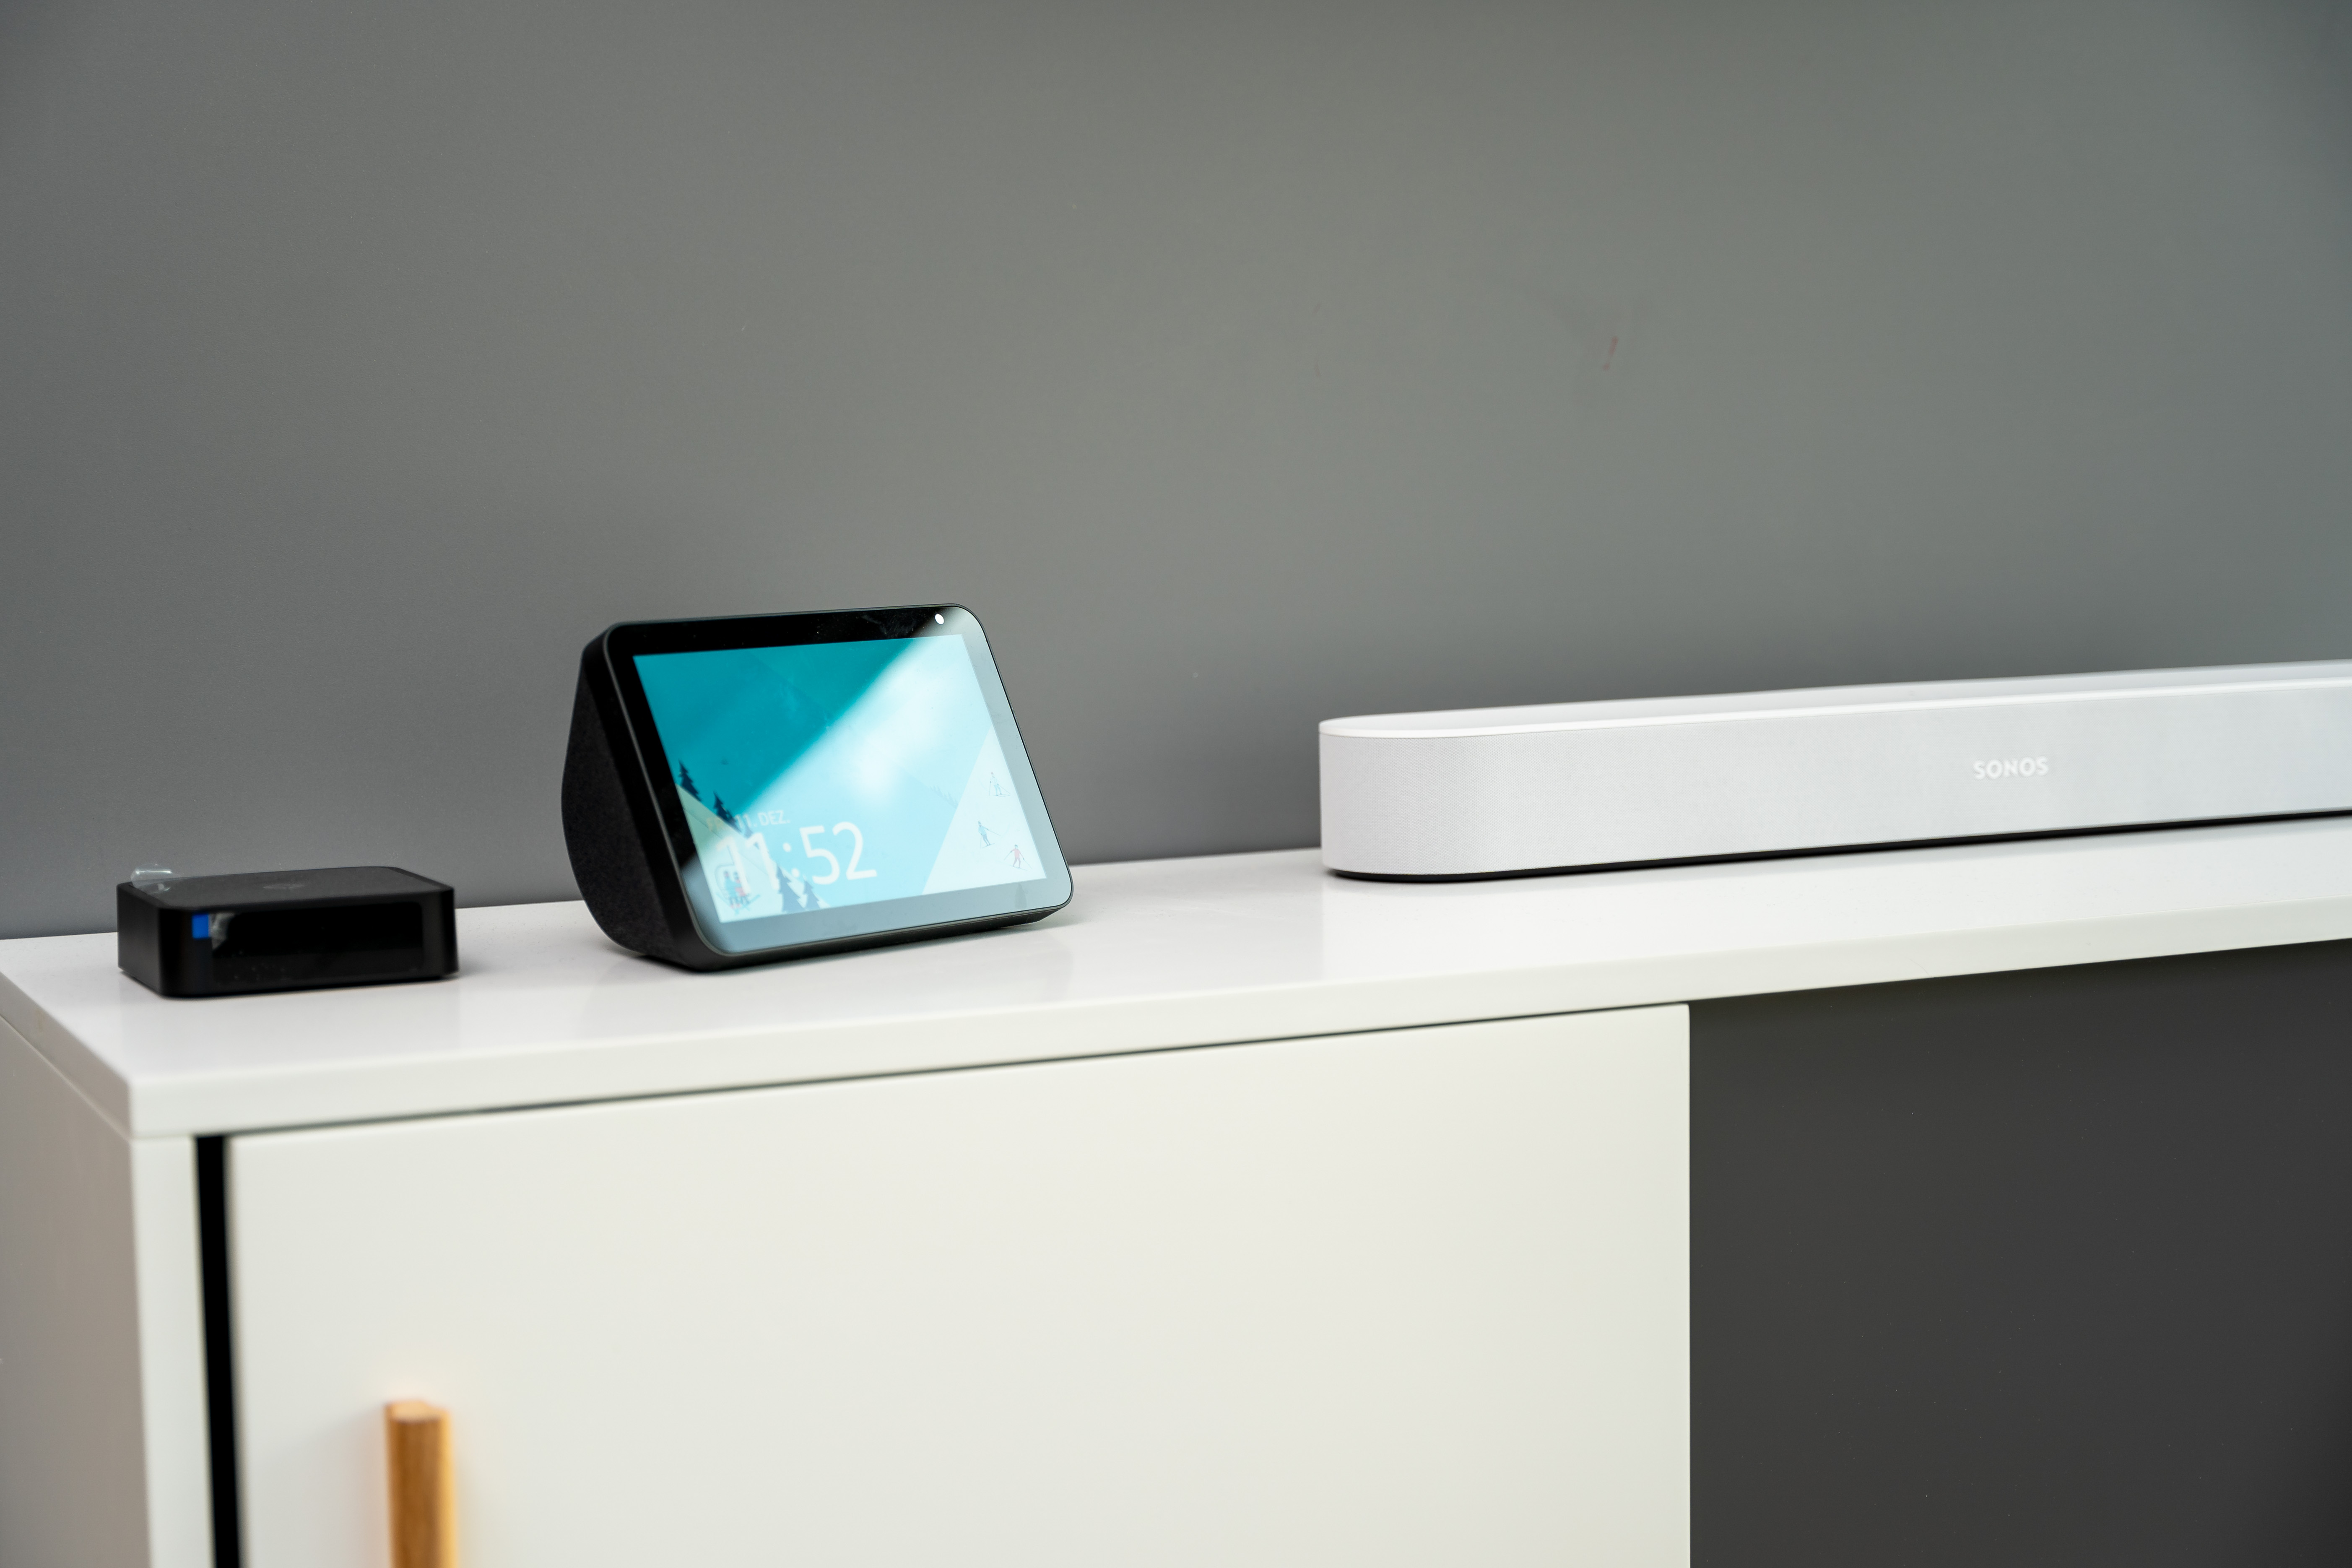 Entertainment system of the smart home solution